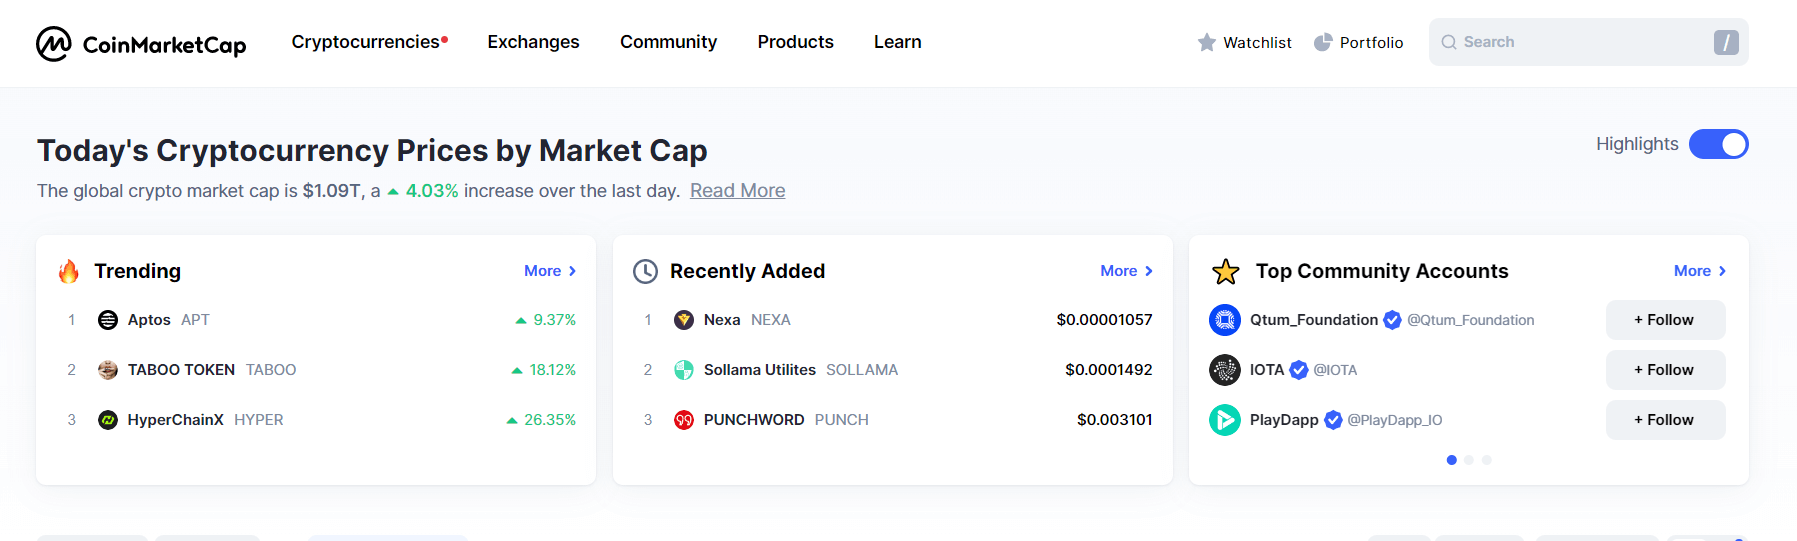 new listed cryptocurrencies coinmarketcap